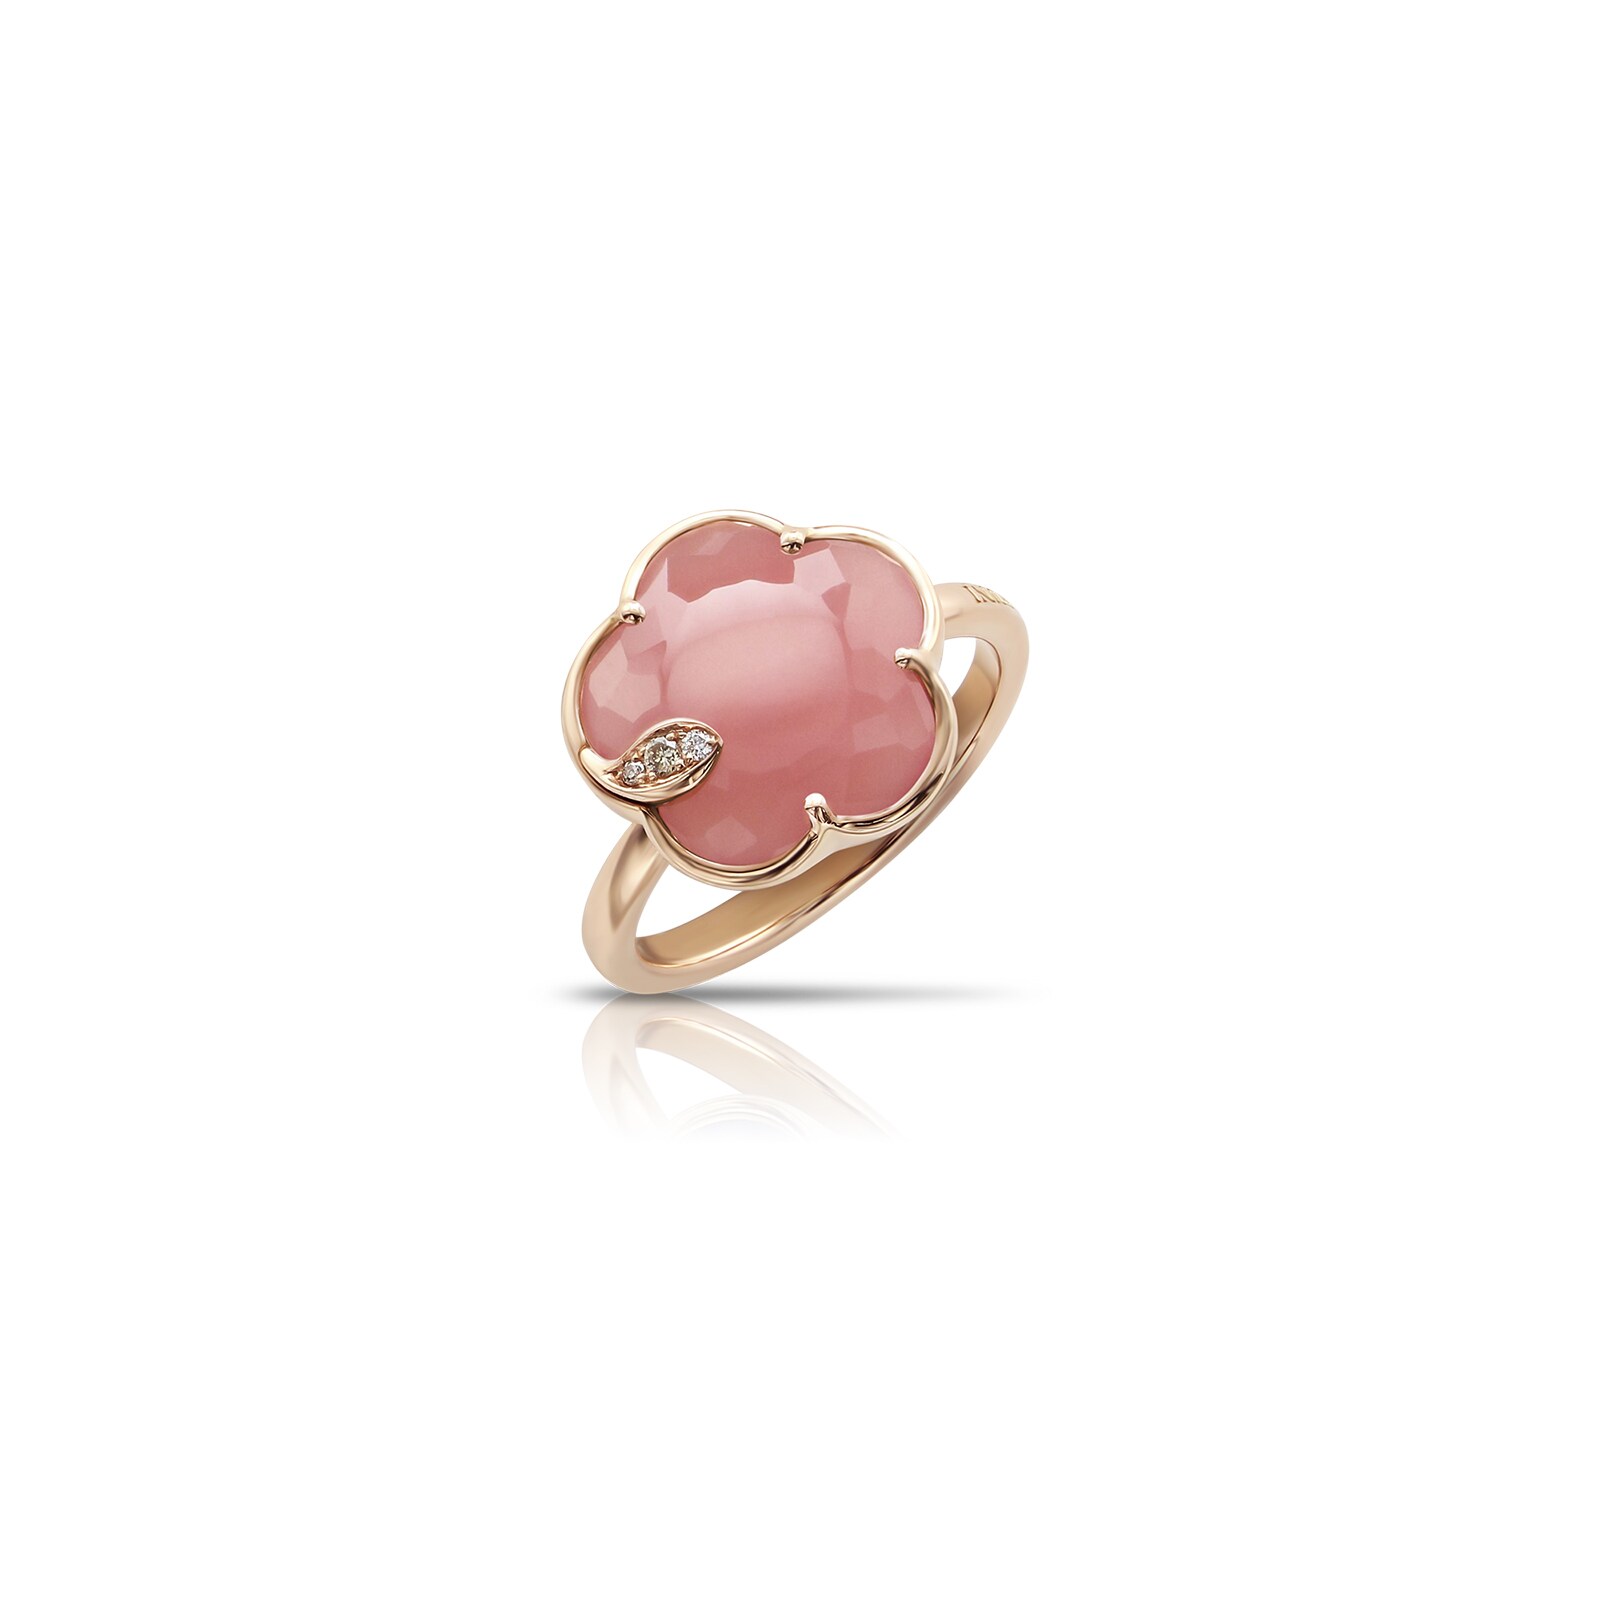 Petit Joli Ring in 18ct Rose Gold with Pink Chalcedony and Diamonds - Ring Size M